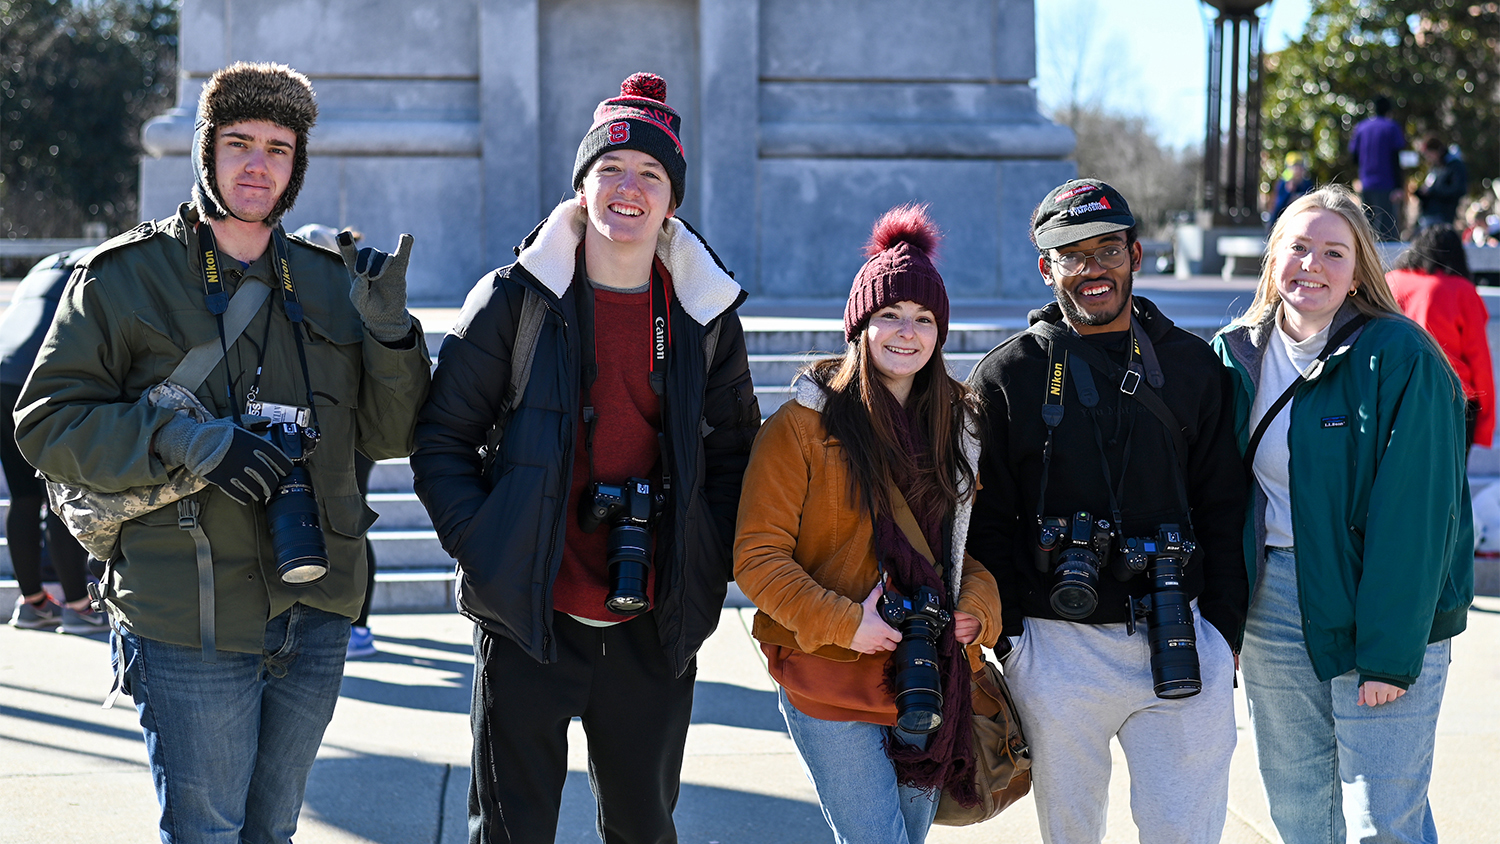 Left to right: Oscar Codes Bodien, Reilly Witte, Dani Meyer, Jermaine Hudson and Hallie Walker of the Technician photography team in front of the Belltower